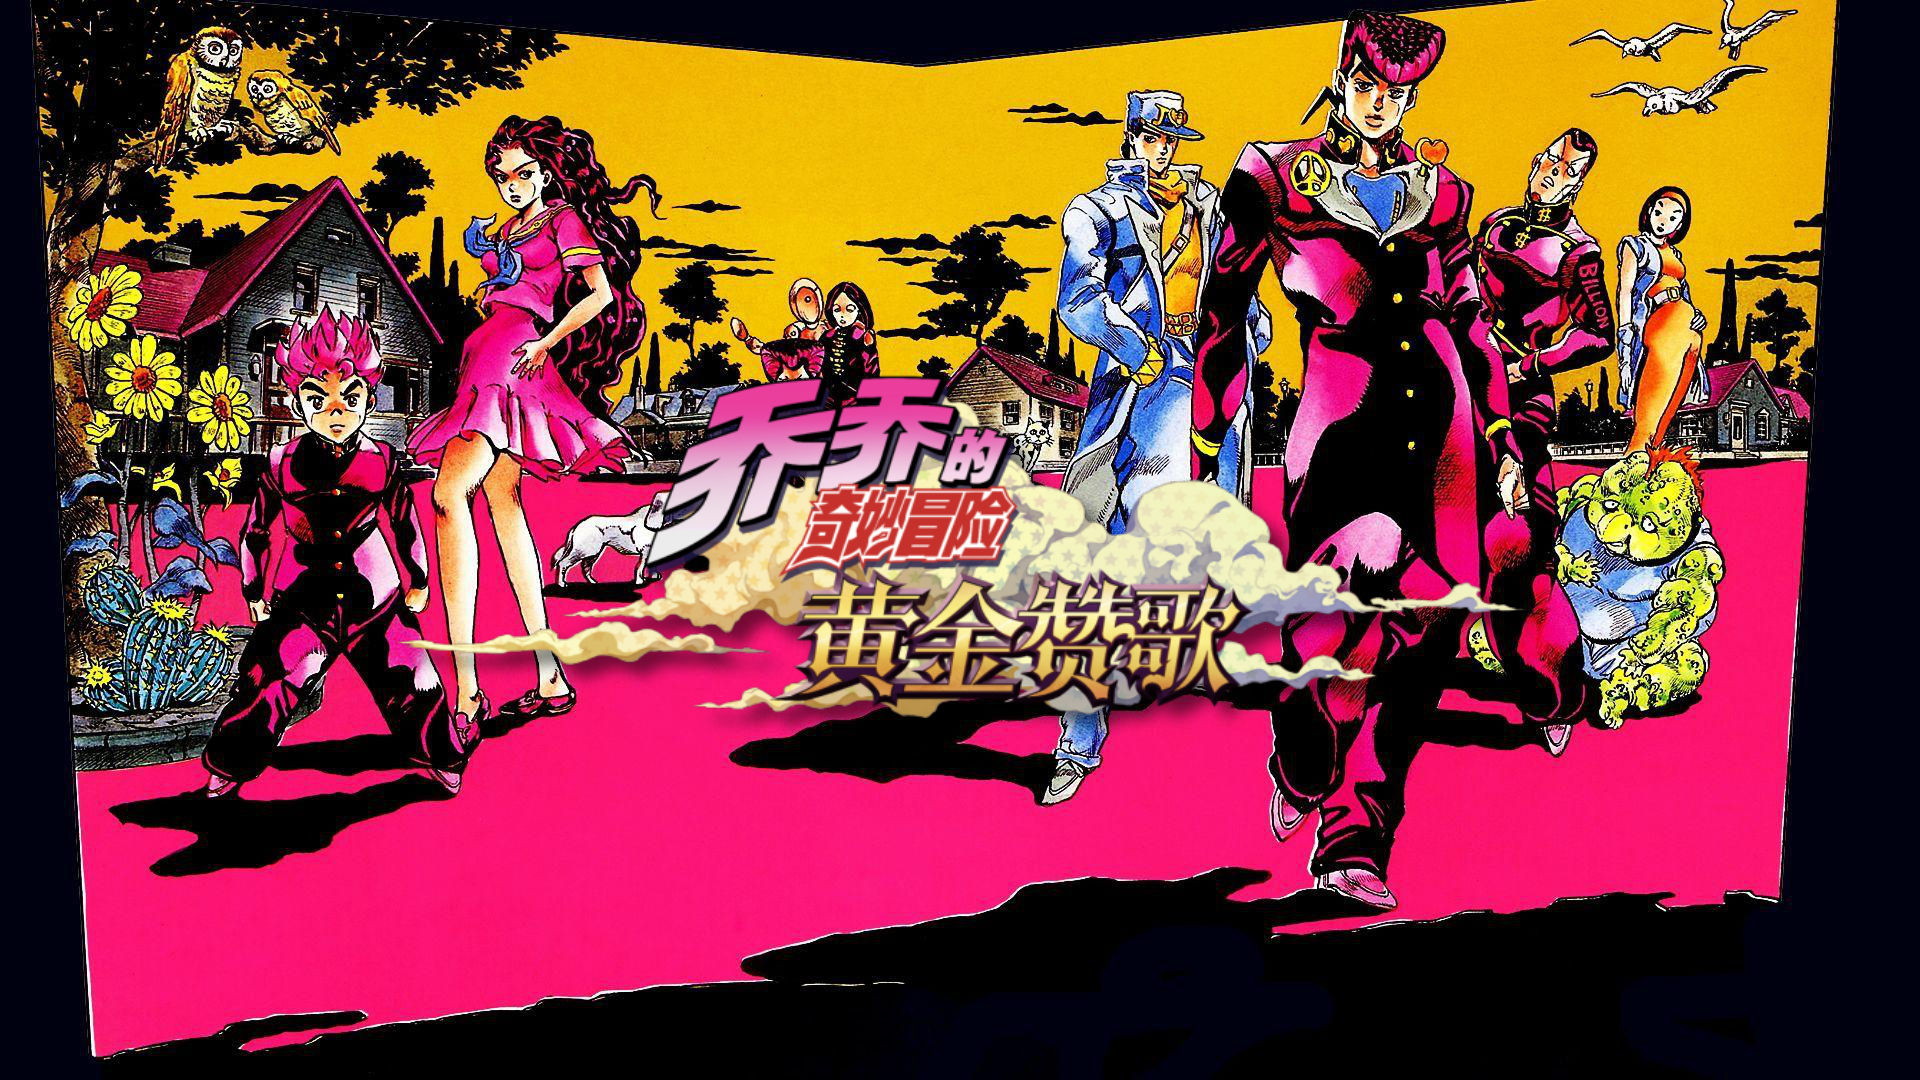 Download Jojo Bizarre Adventure Mobile Games, A New Turn Based Anime on  Mobile! – Roonby